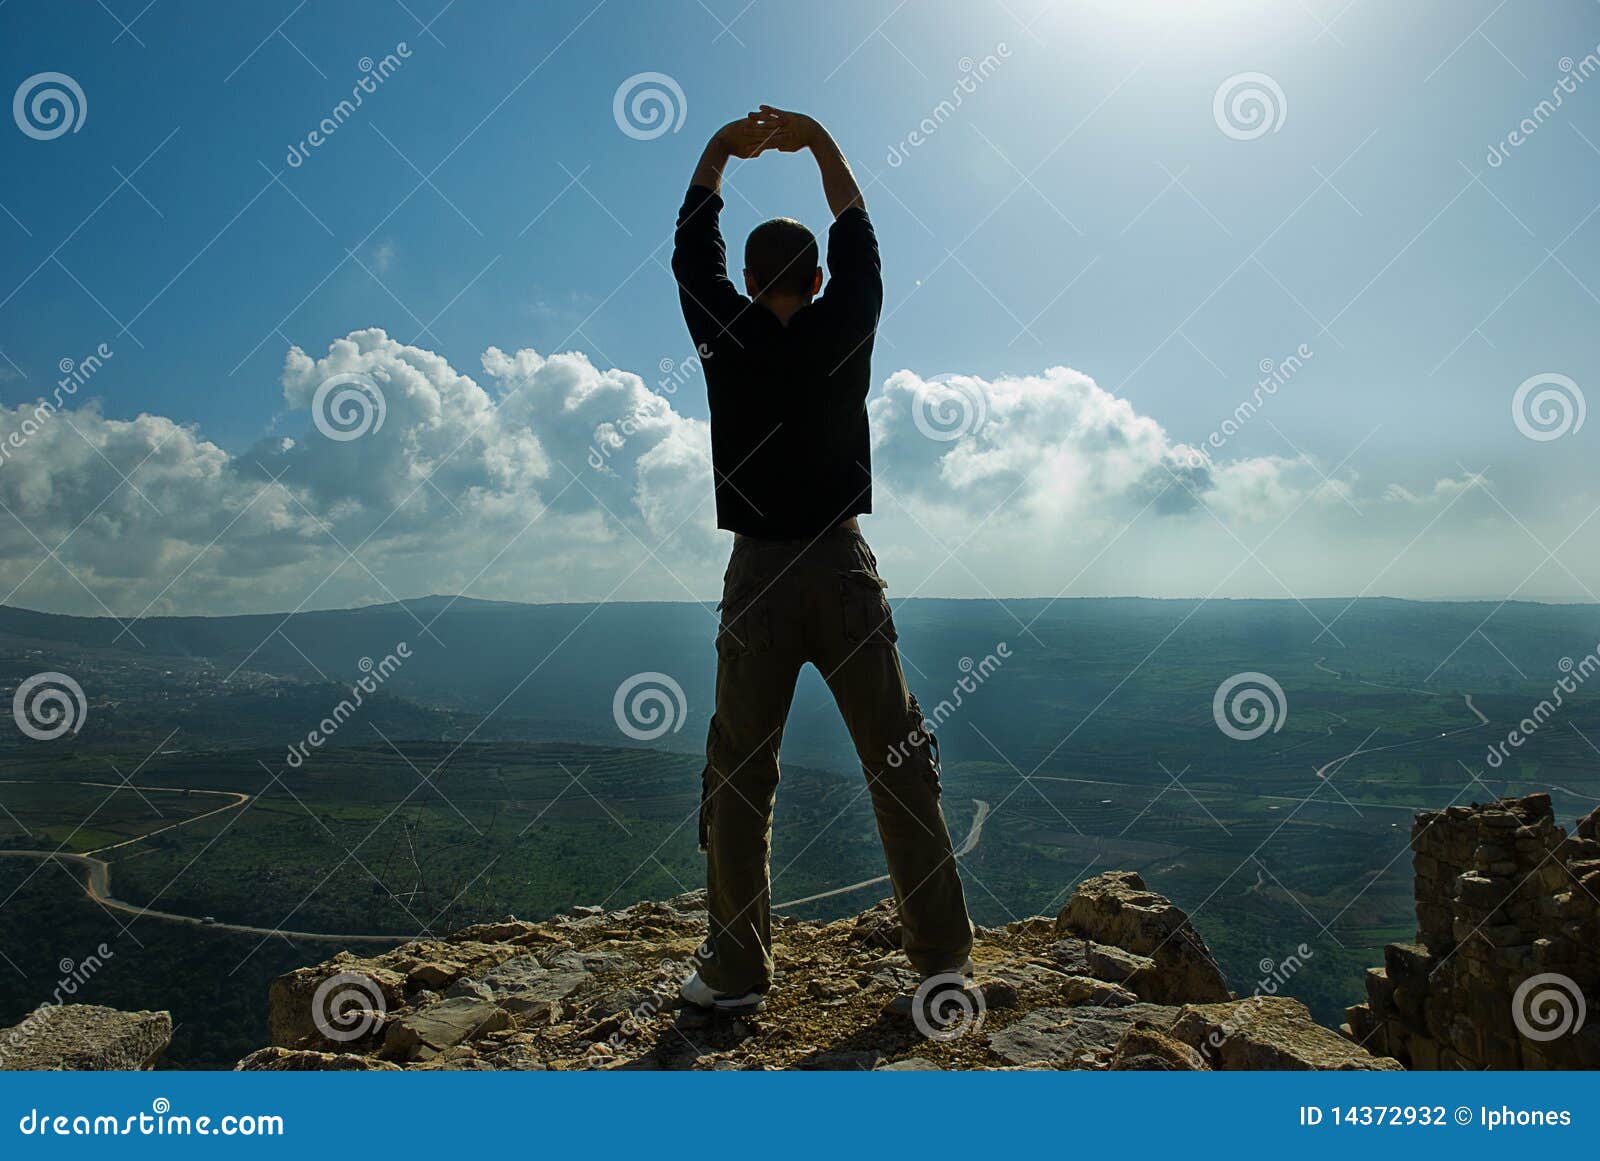 man standing at the precipice